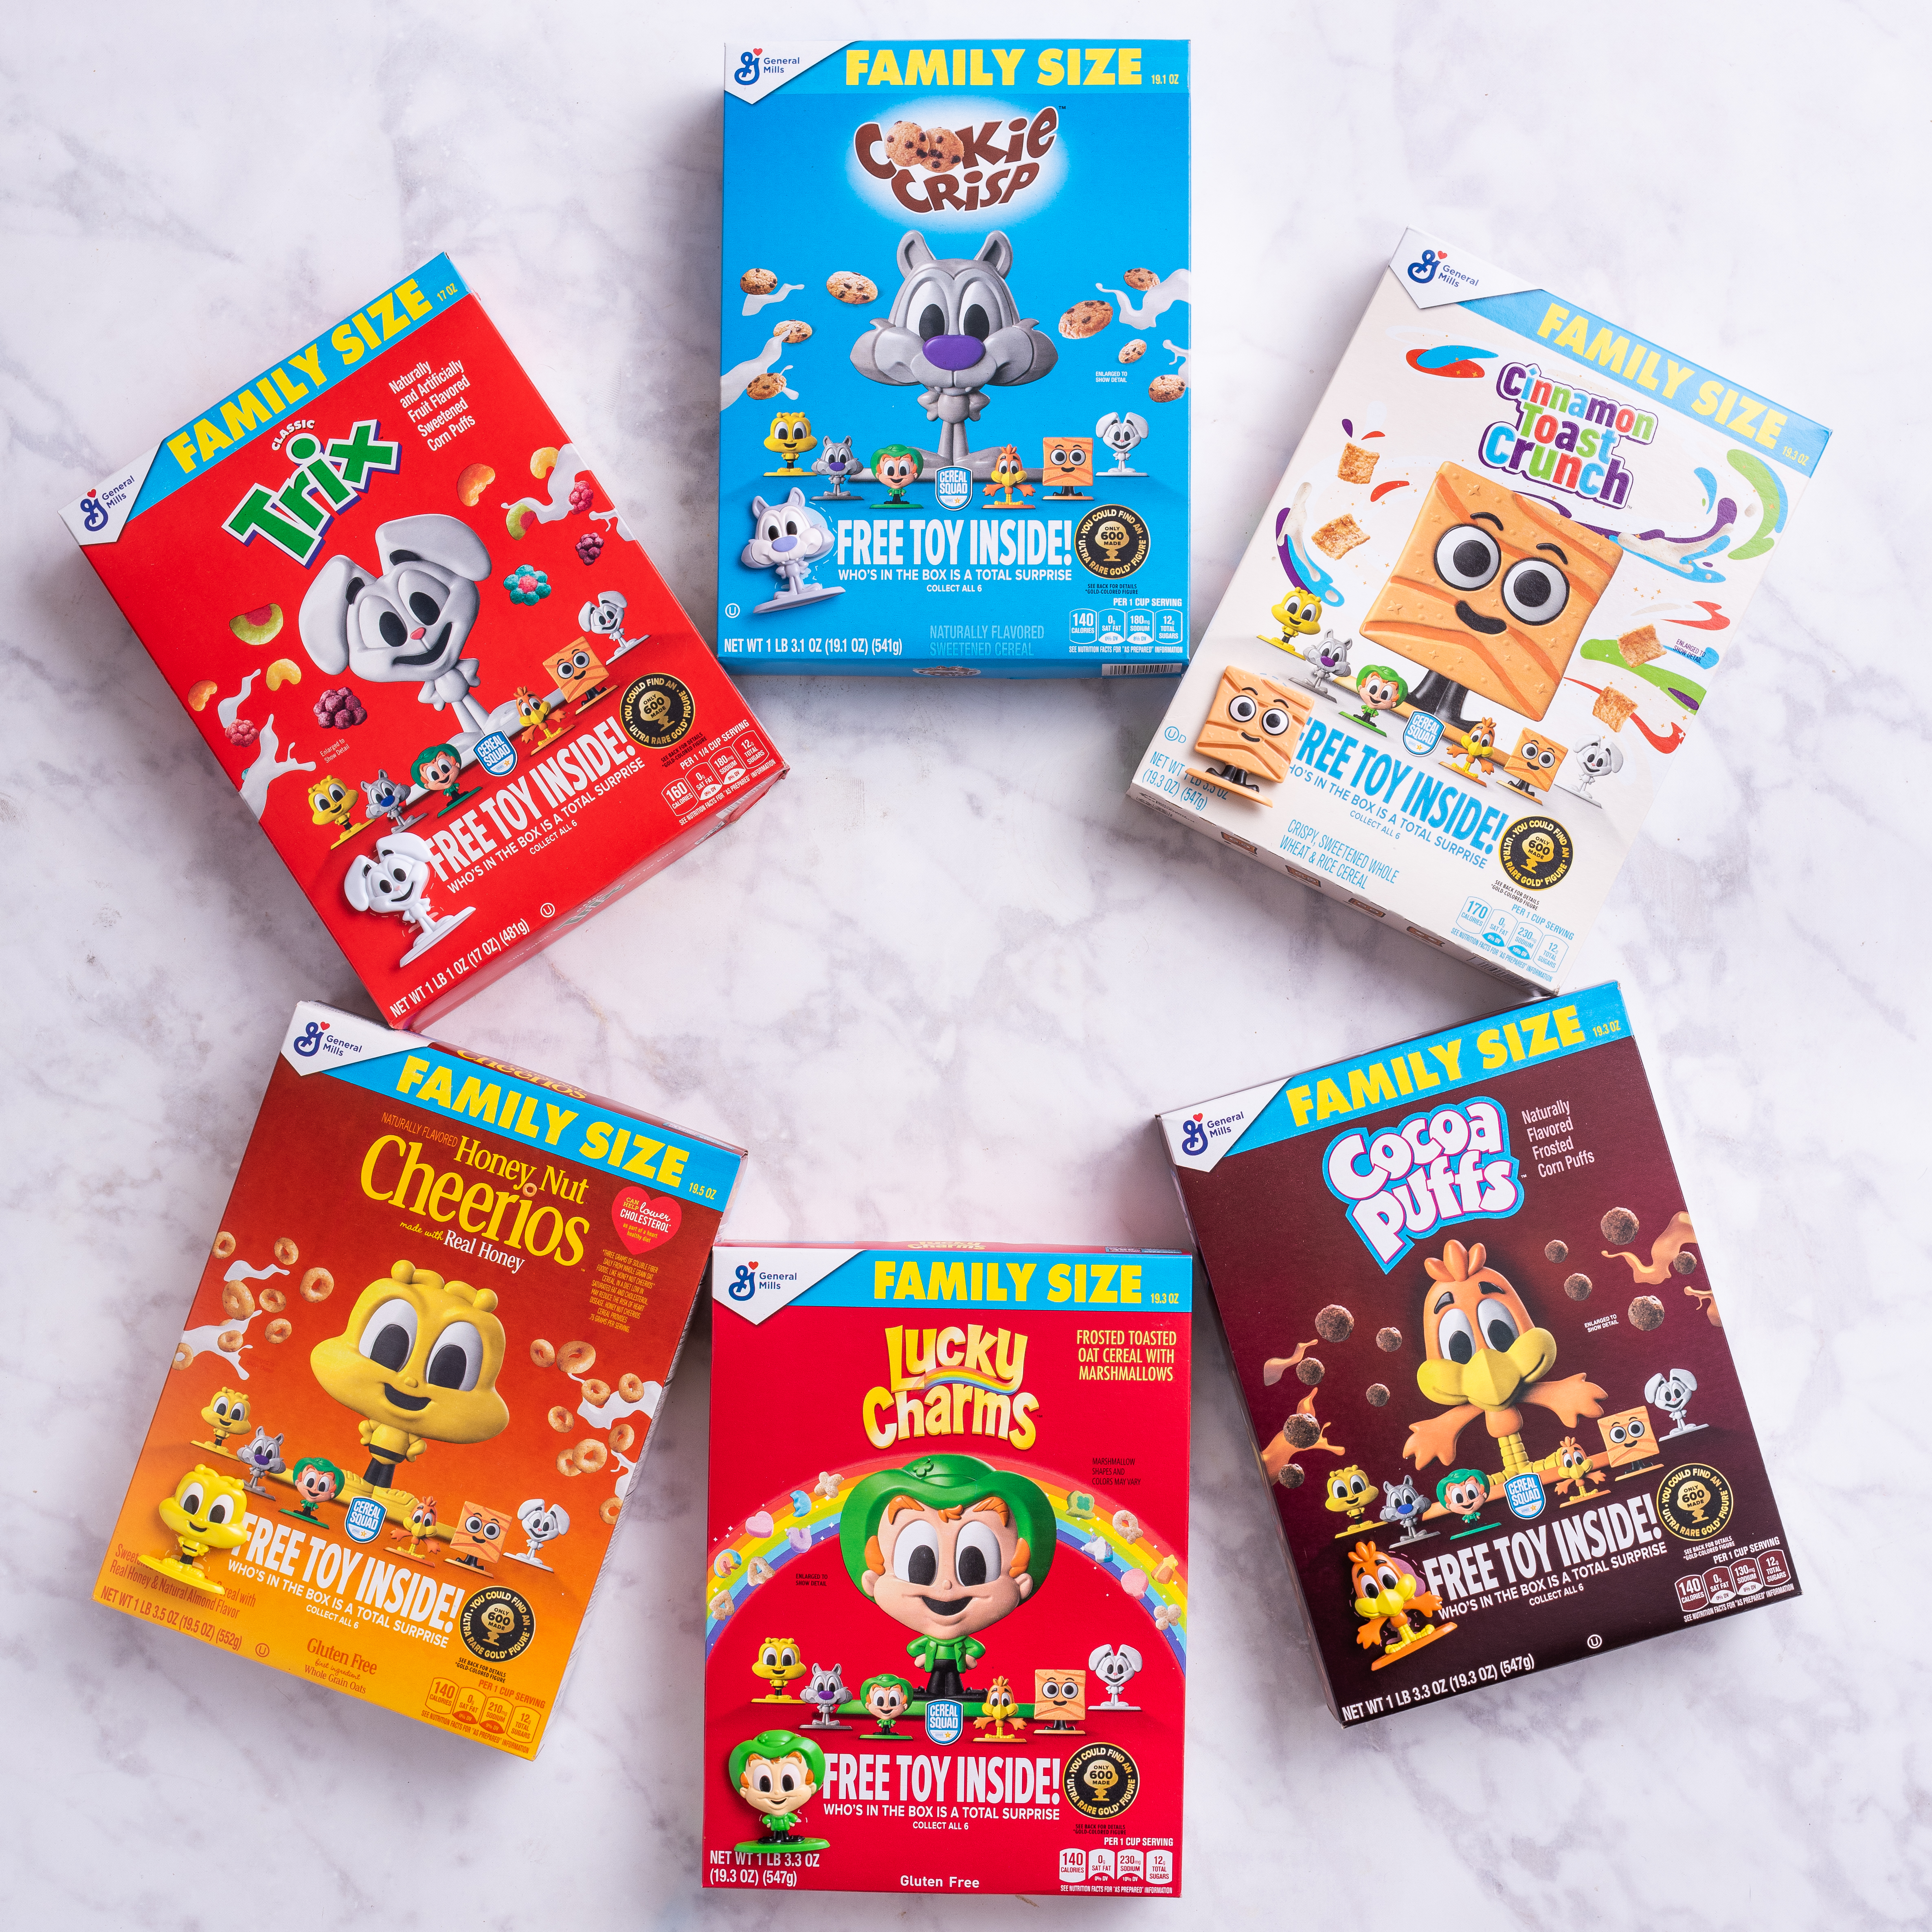 Six Cereal Squad cereal boxes